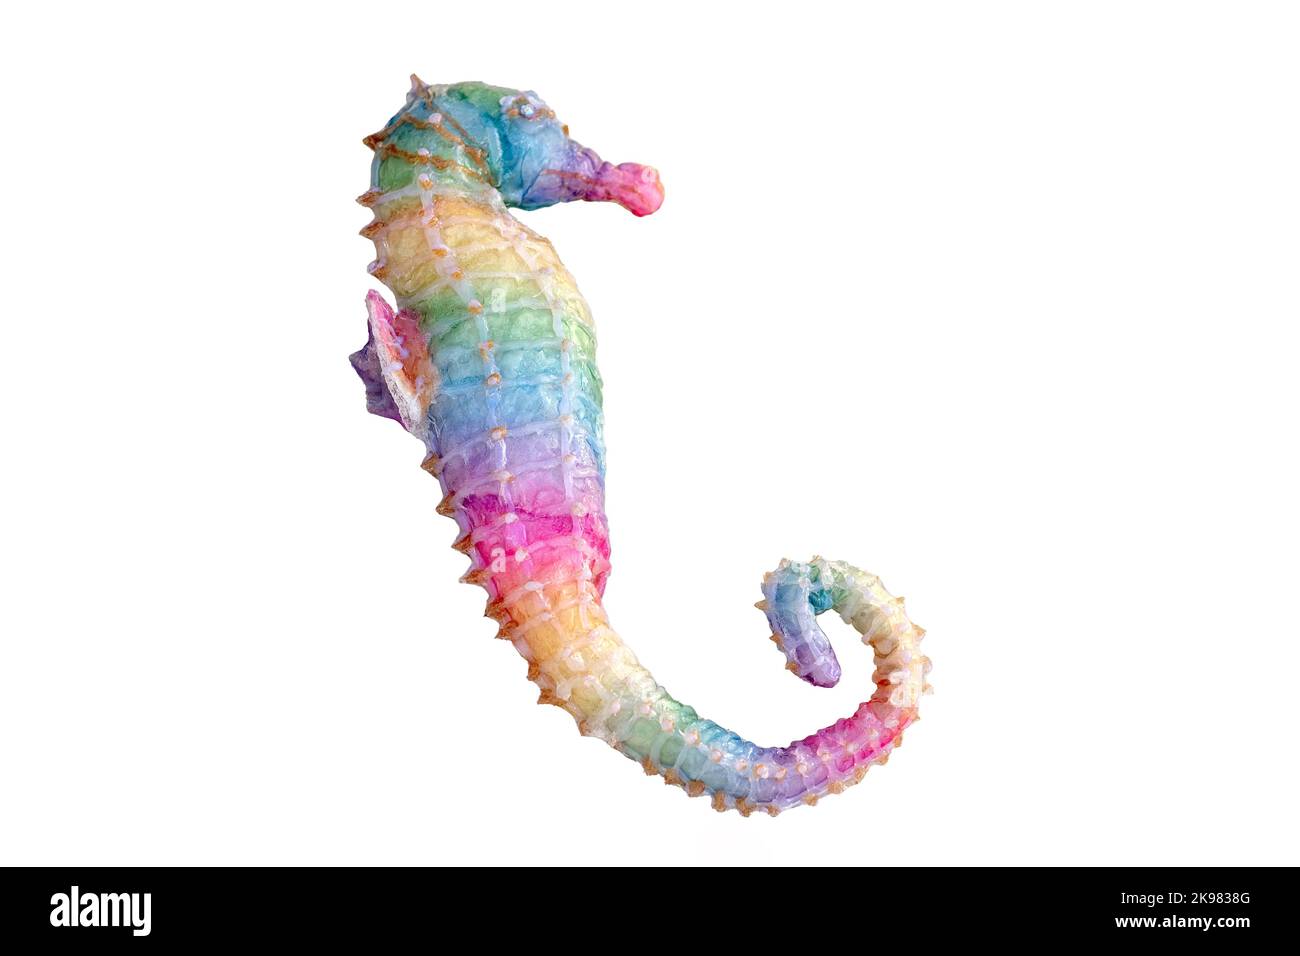 A figurine of a rainbow seahorse,isolated on white background Stock Photo